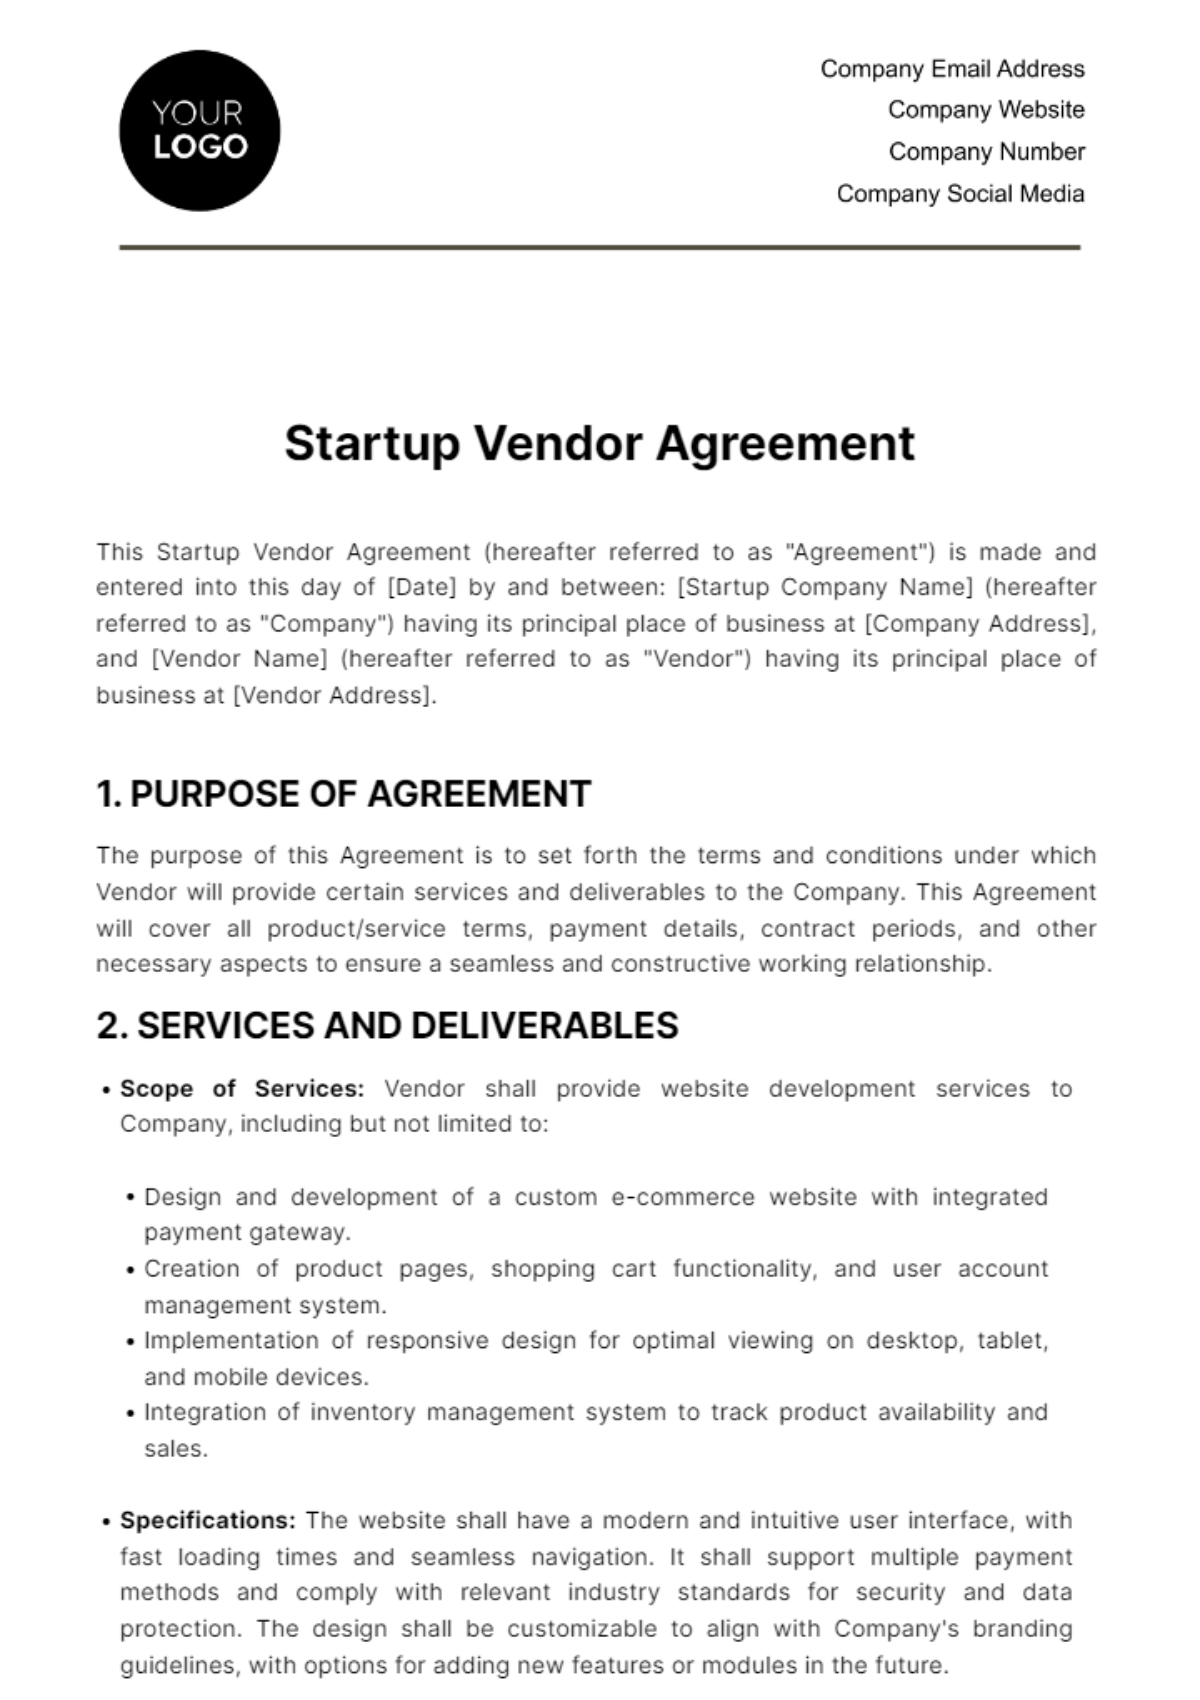 Free Startup Vendor Agreement Template